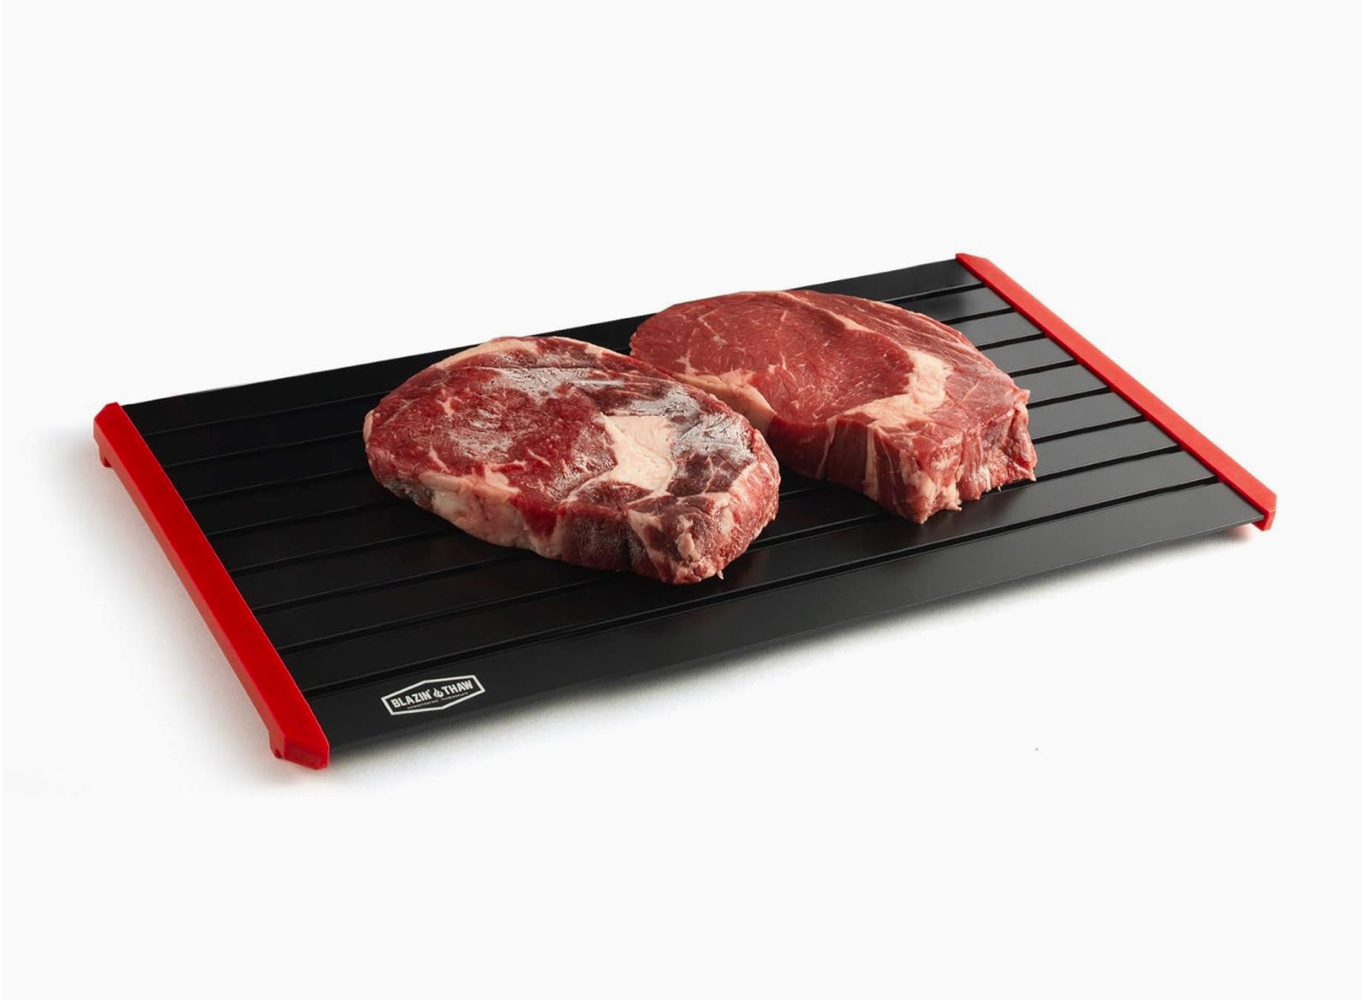 MEAT DEFROSTING TRAY